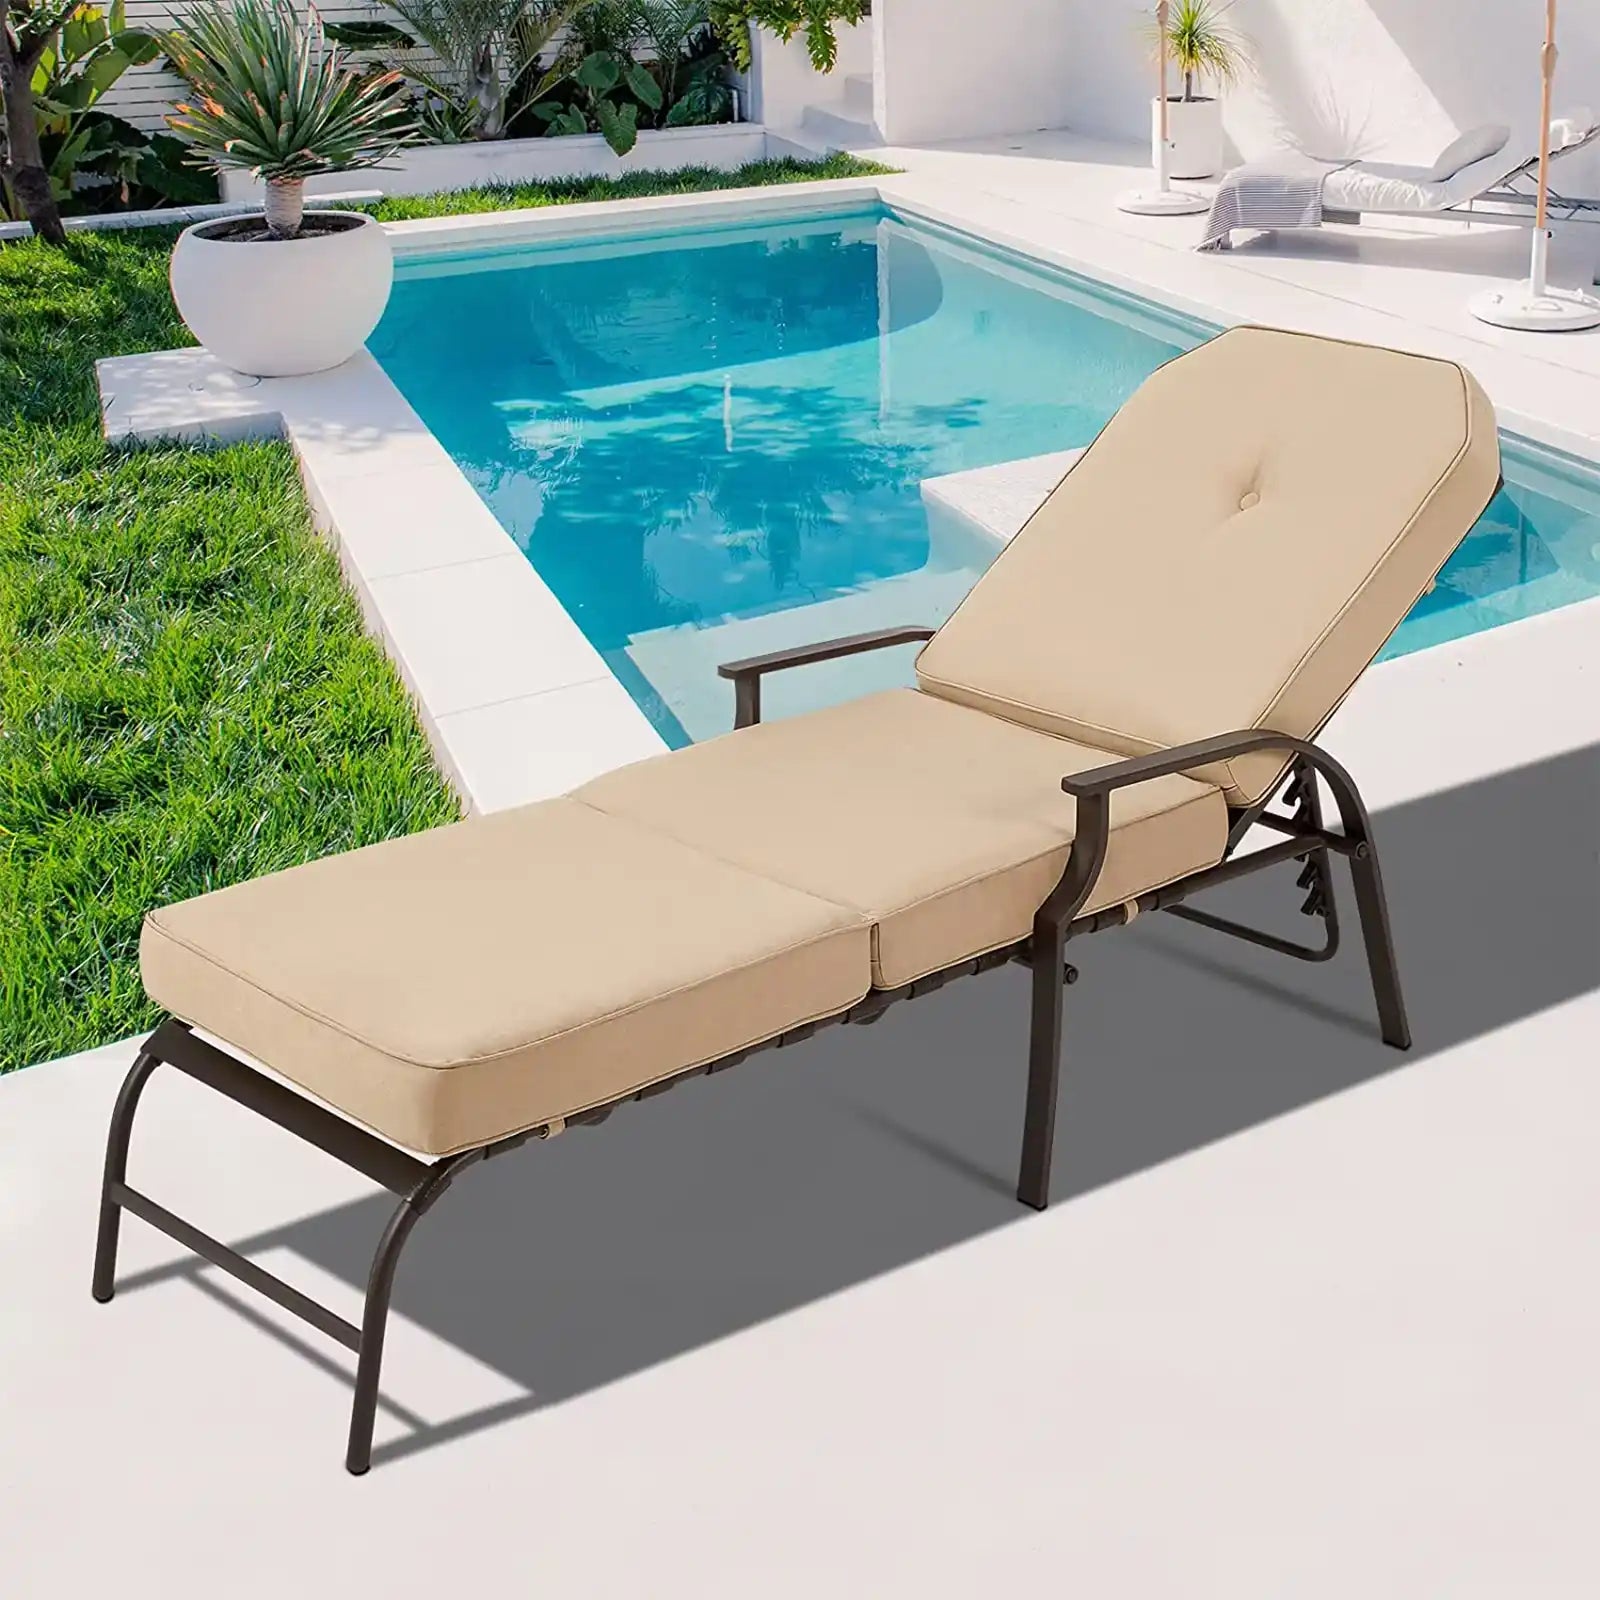 Adjustable Outdoor Chaise Lounge Chair for Patio, Poolside with UV-Resistant Cushion